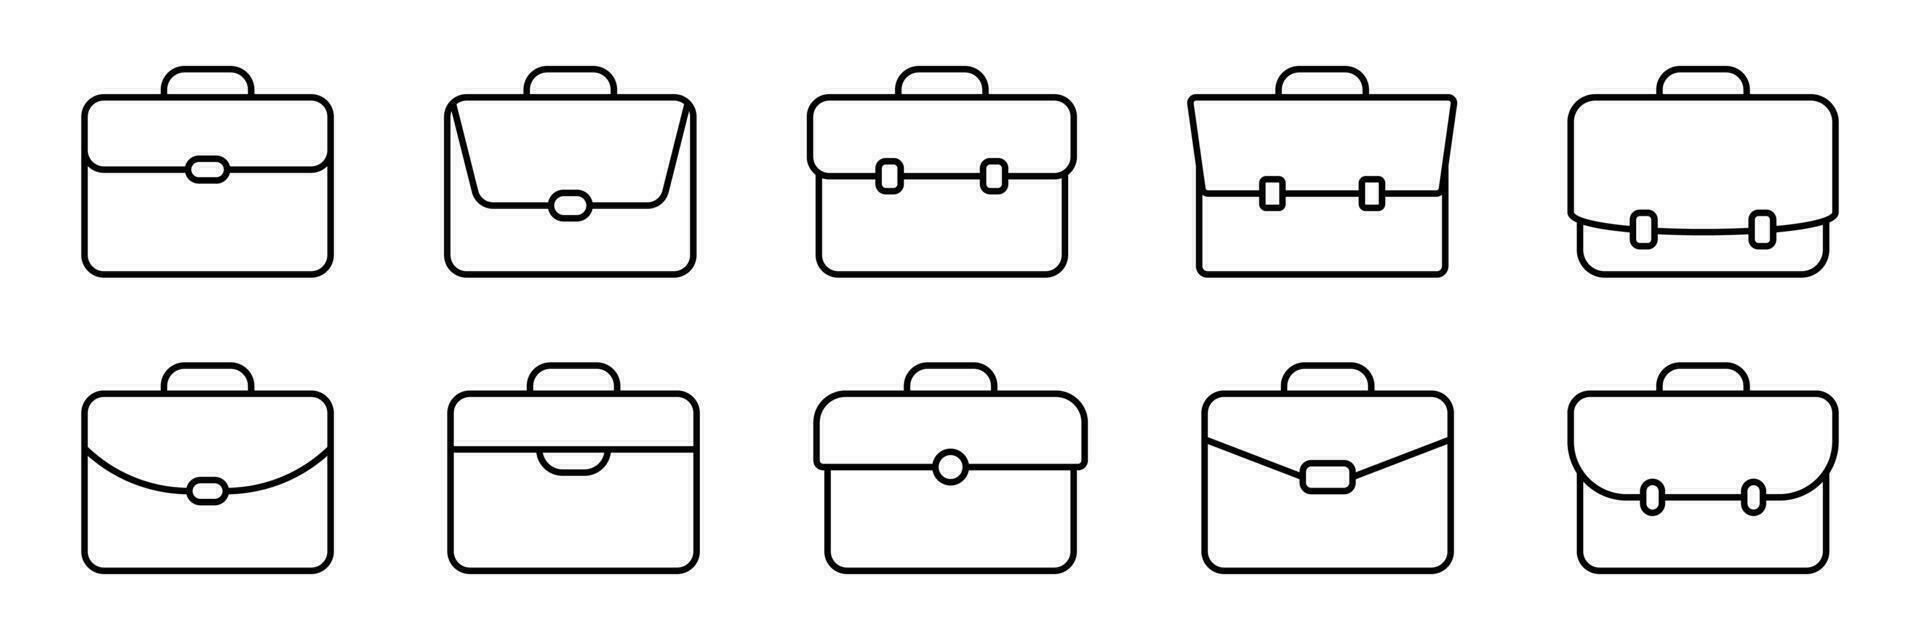 Briefcase icon set. Suitcase, portfolio symbol. Business briefcase icon designed in filled, outline, line and stroke style. Vector illustration isolated on white background.